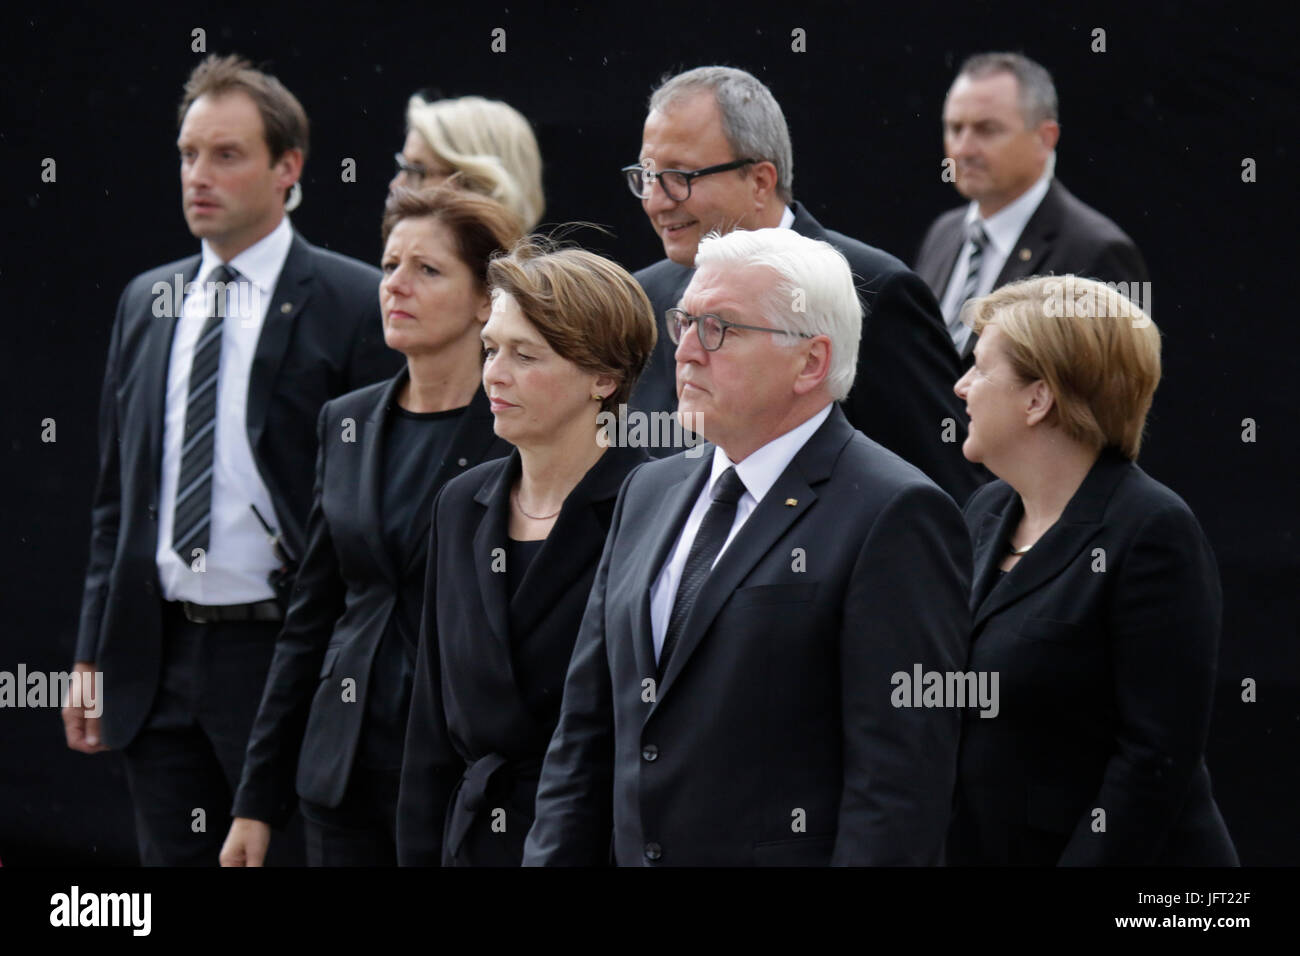 Speyer, Germany. 01st July, 2017. Frank-Walter Steinmeier (centre), the President of Germany, his wife Elke Budenbender (left), Andreas Vosskuhle (centre 2nd row), the President of the Federal Constitutional Court of Germany, and Angela Merkel (right), the Chancellor of Germany, walk to the Speyer Cathedral, A funeral mass for the former German Chancellor Helmut Kohl was held in the Cathedral of Speyer. it was attended by over 1000 invited guests and several thousand people followed the mass outside the Cathedral. Credit: Michael Debets/Pacific Press/Alamy Live News Stock Photo